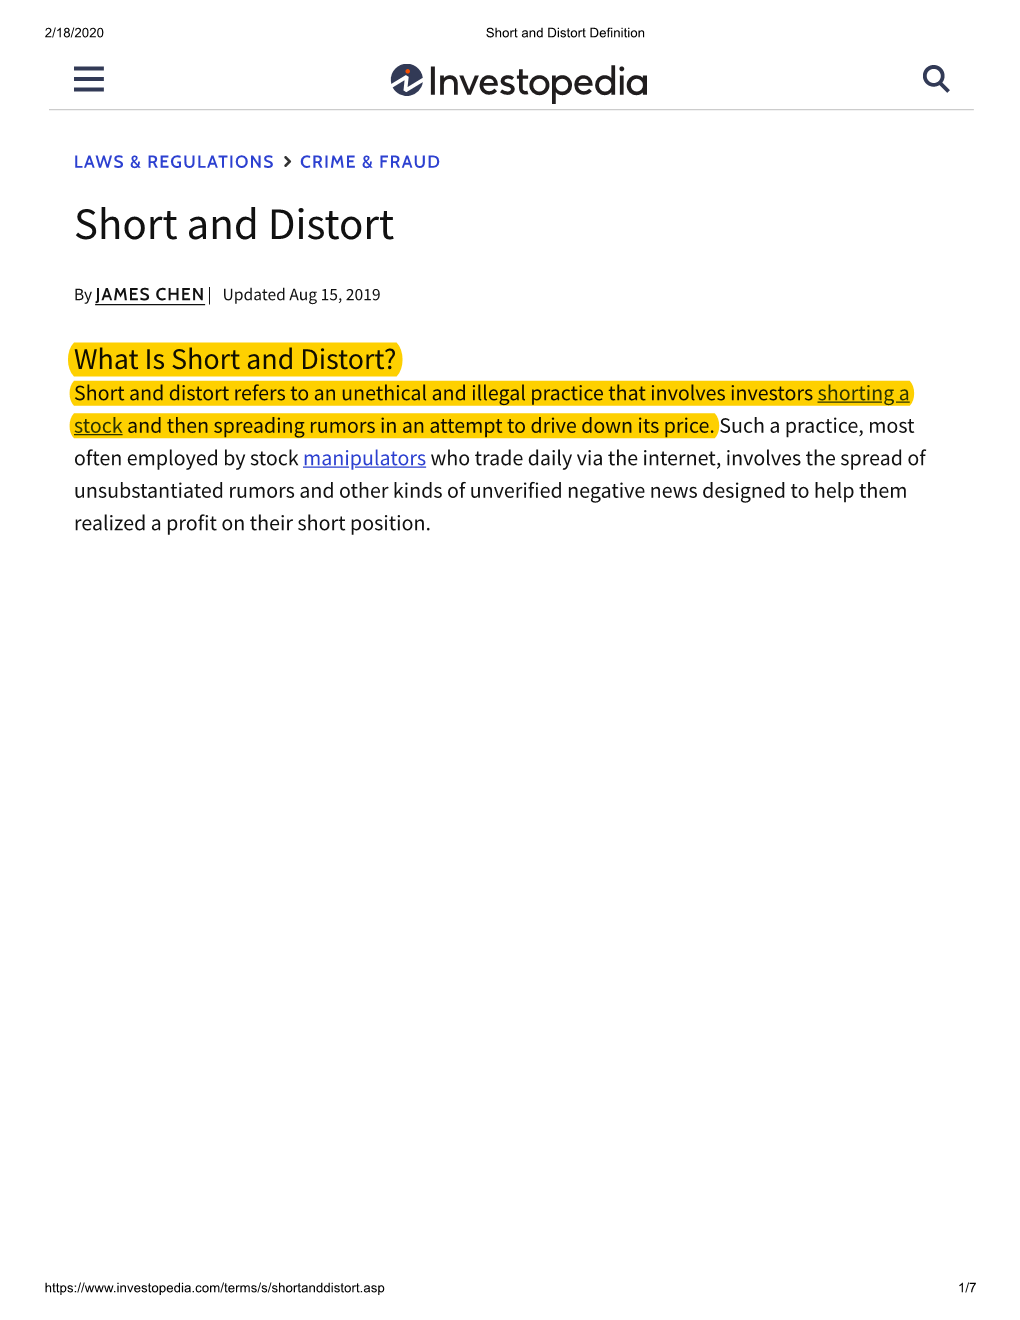 Short and Distort Definition